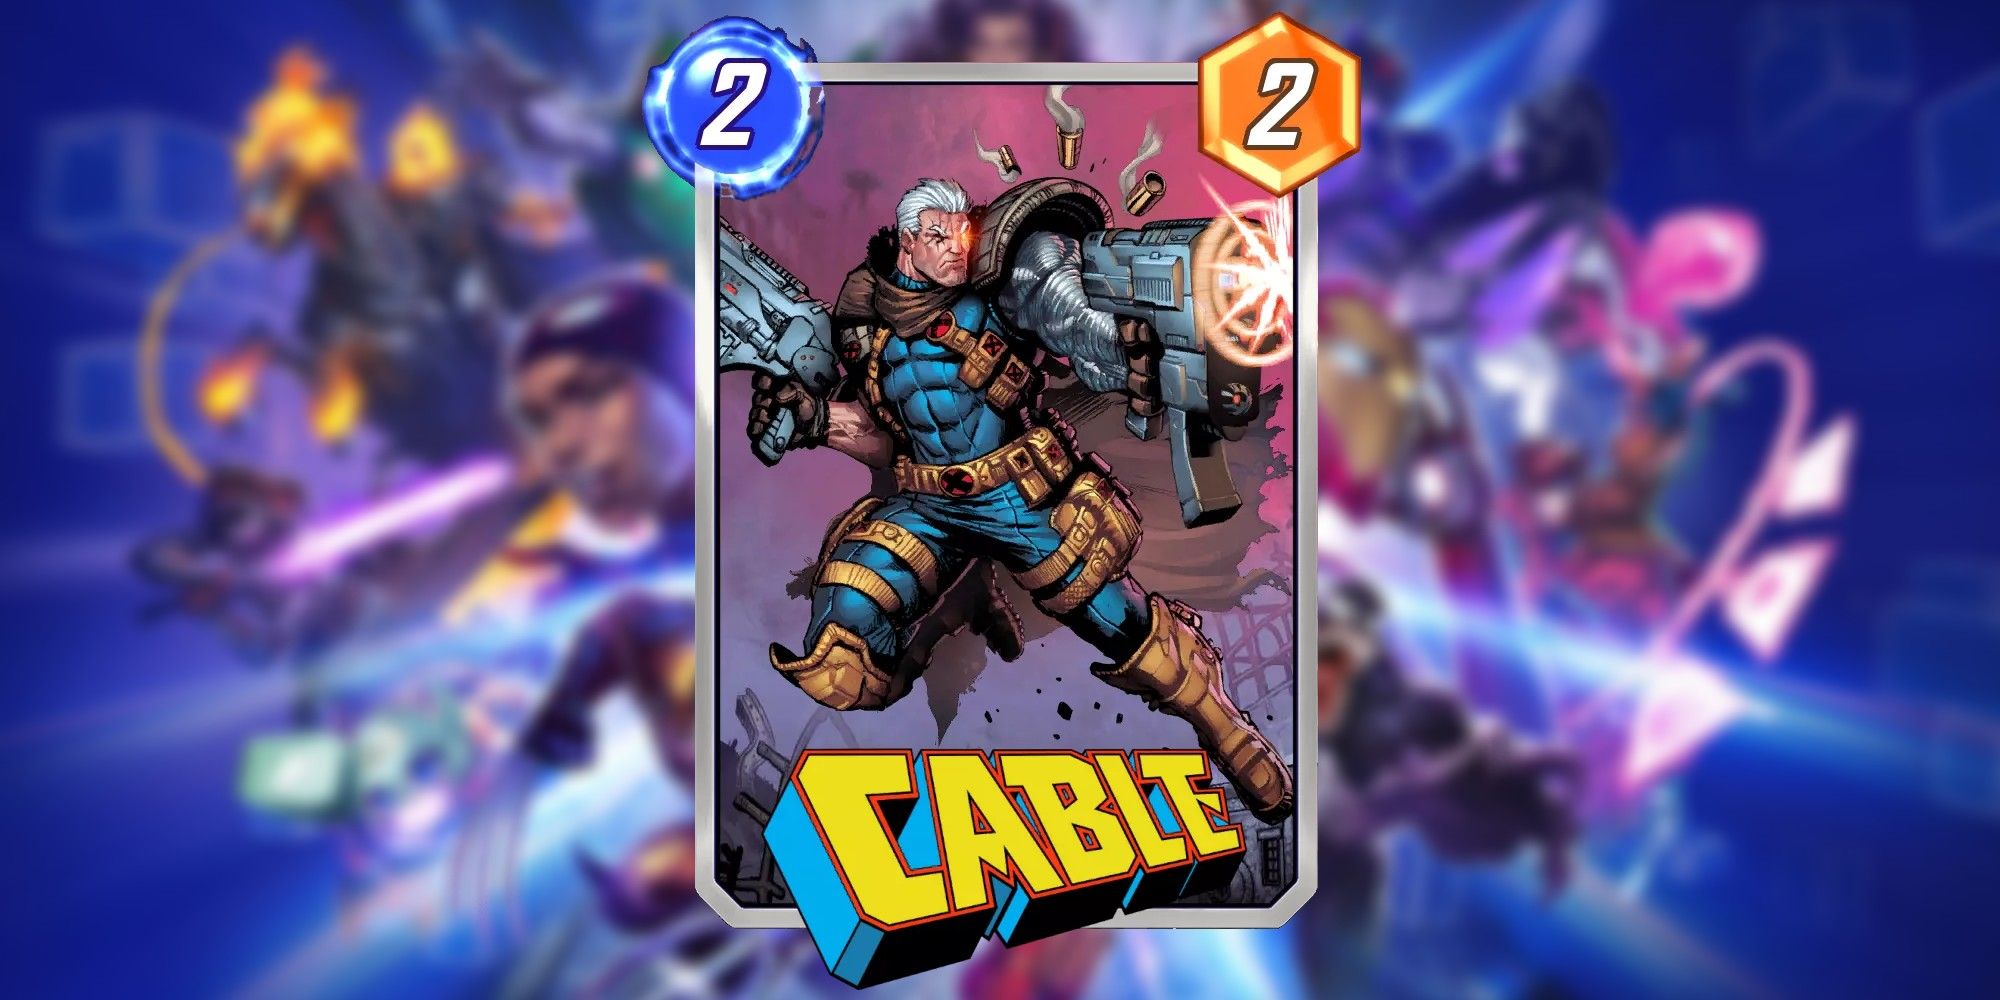 cable's card